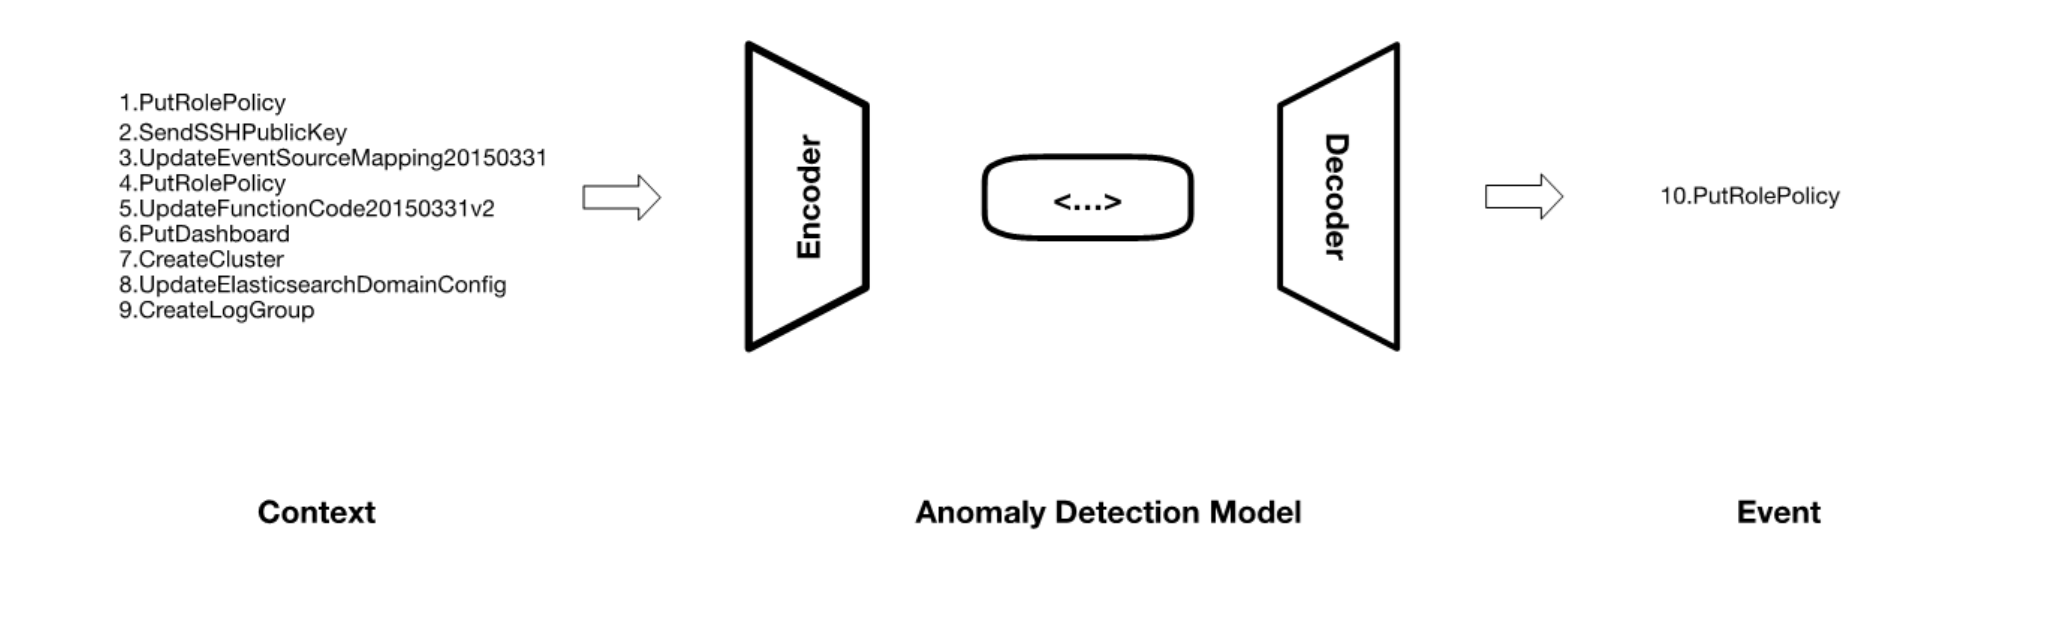 anomaly detection model